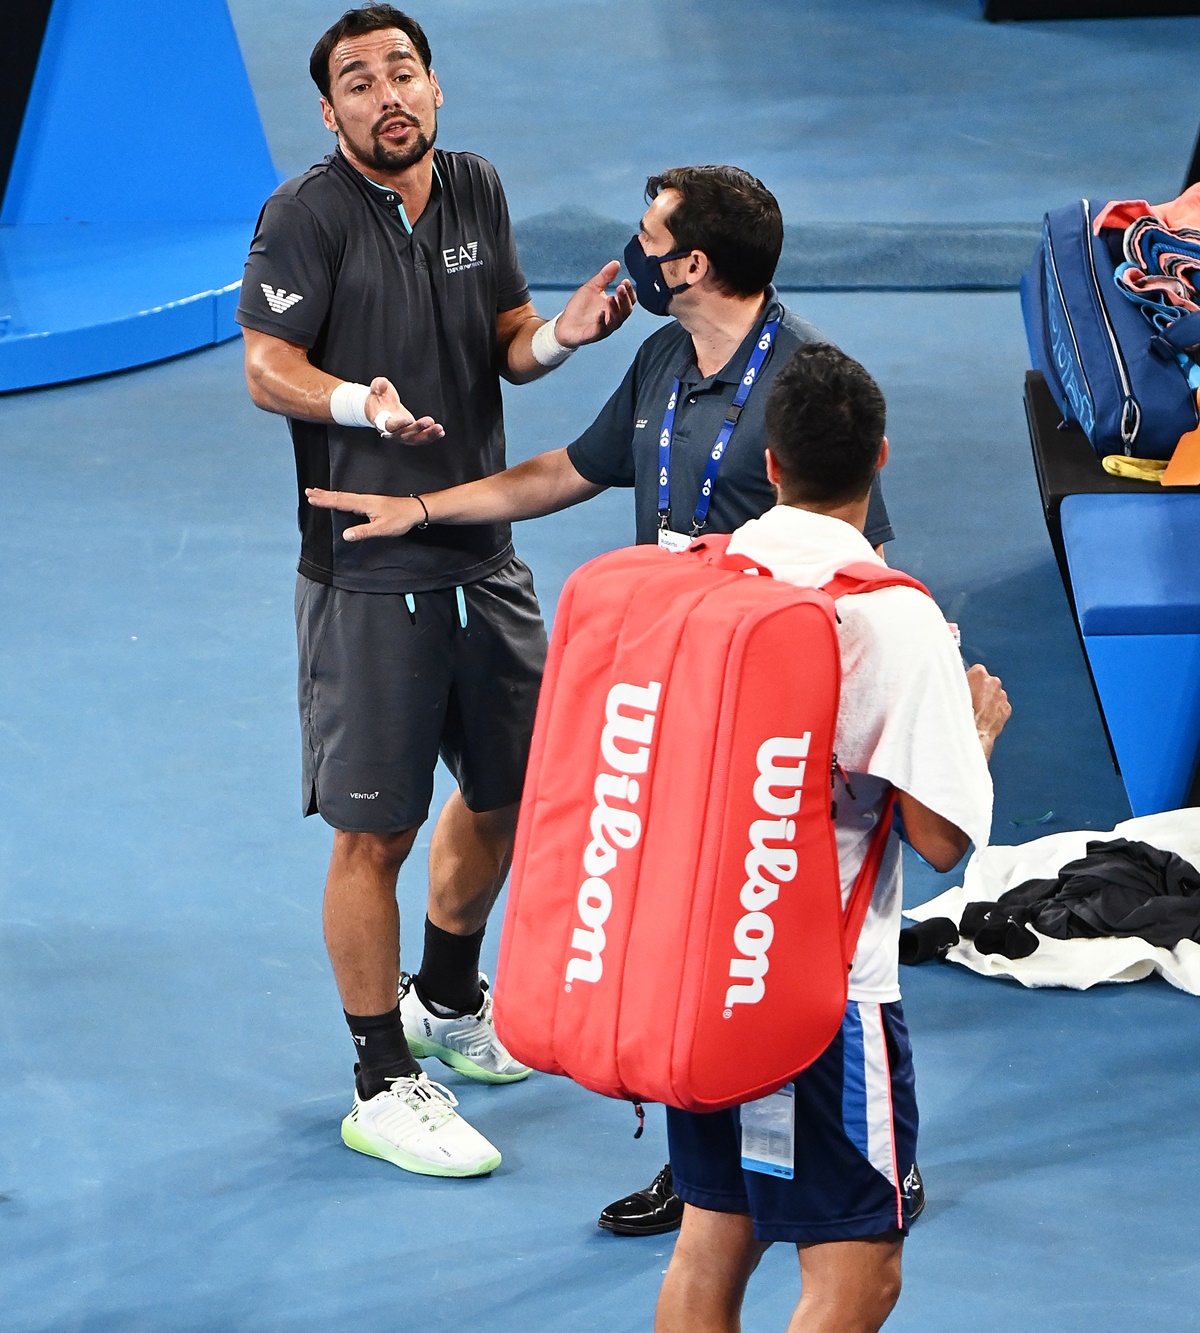 A tournament official intervenes as Fabio Fognini and Salvatore Caruso get into a heated argument.